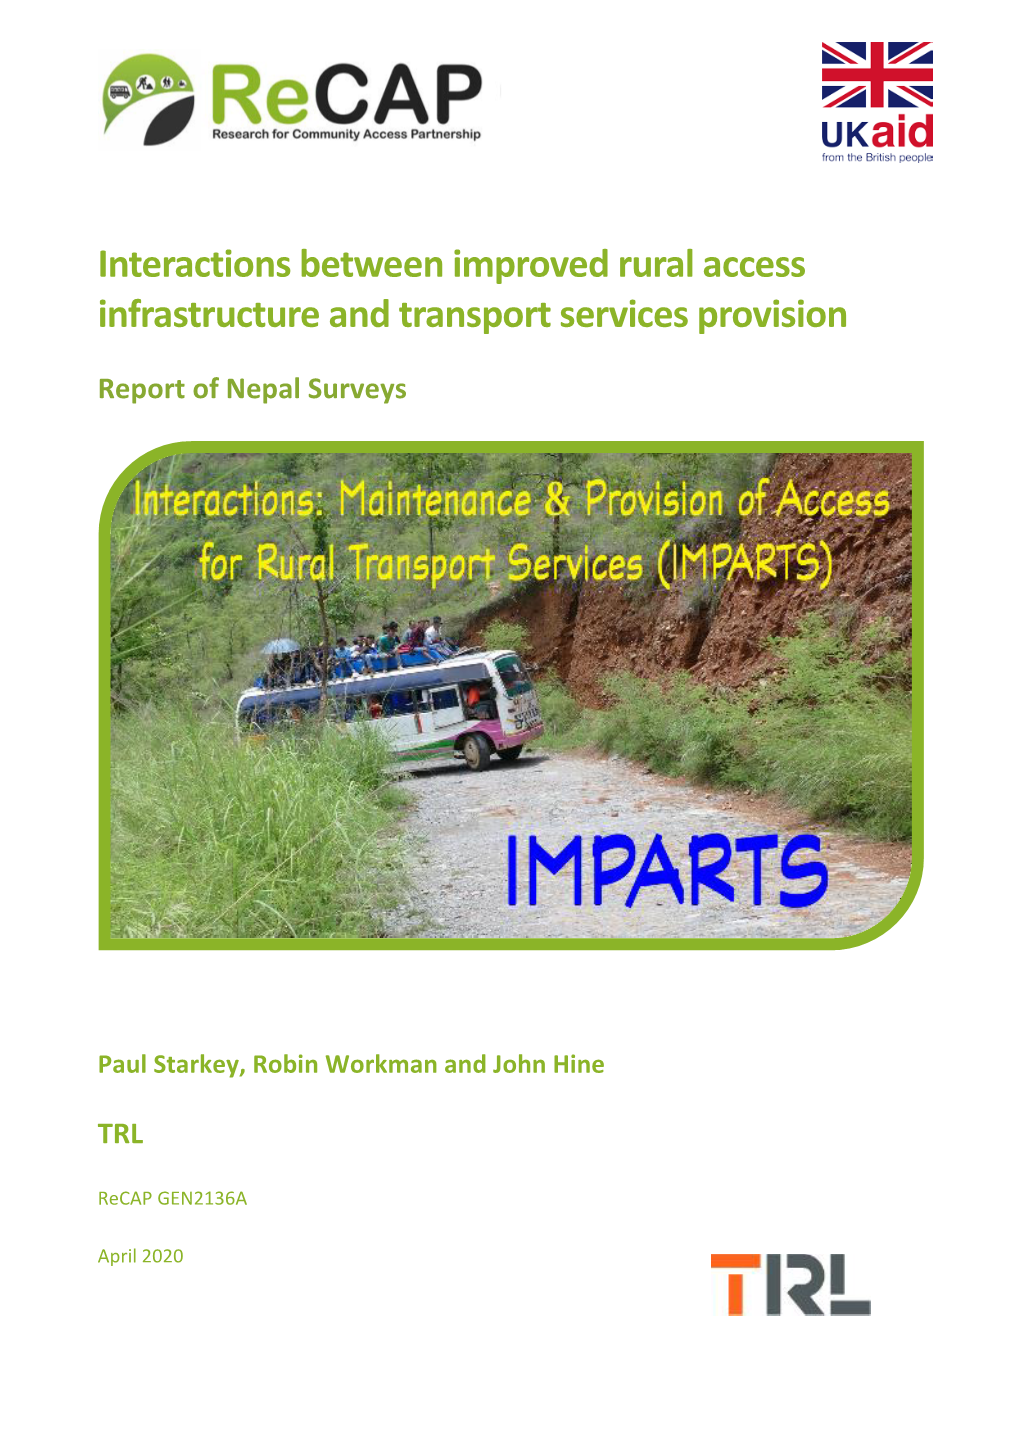 Interactions Between Improved Rural Access Infrastructure and Transport Services Provision